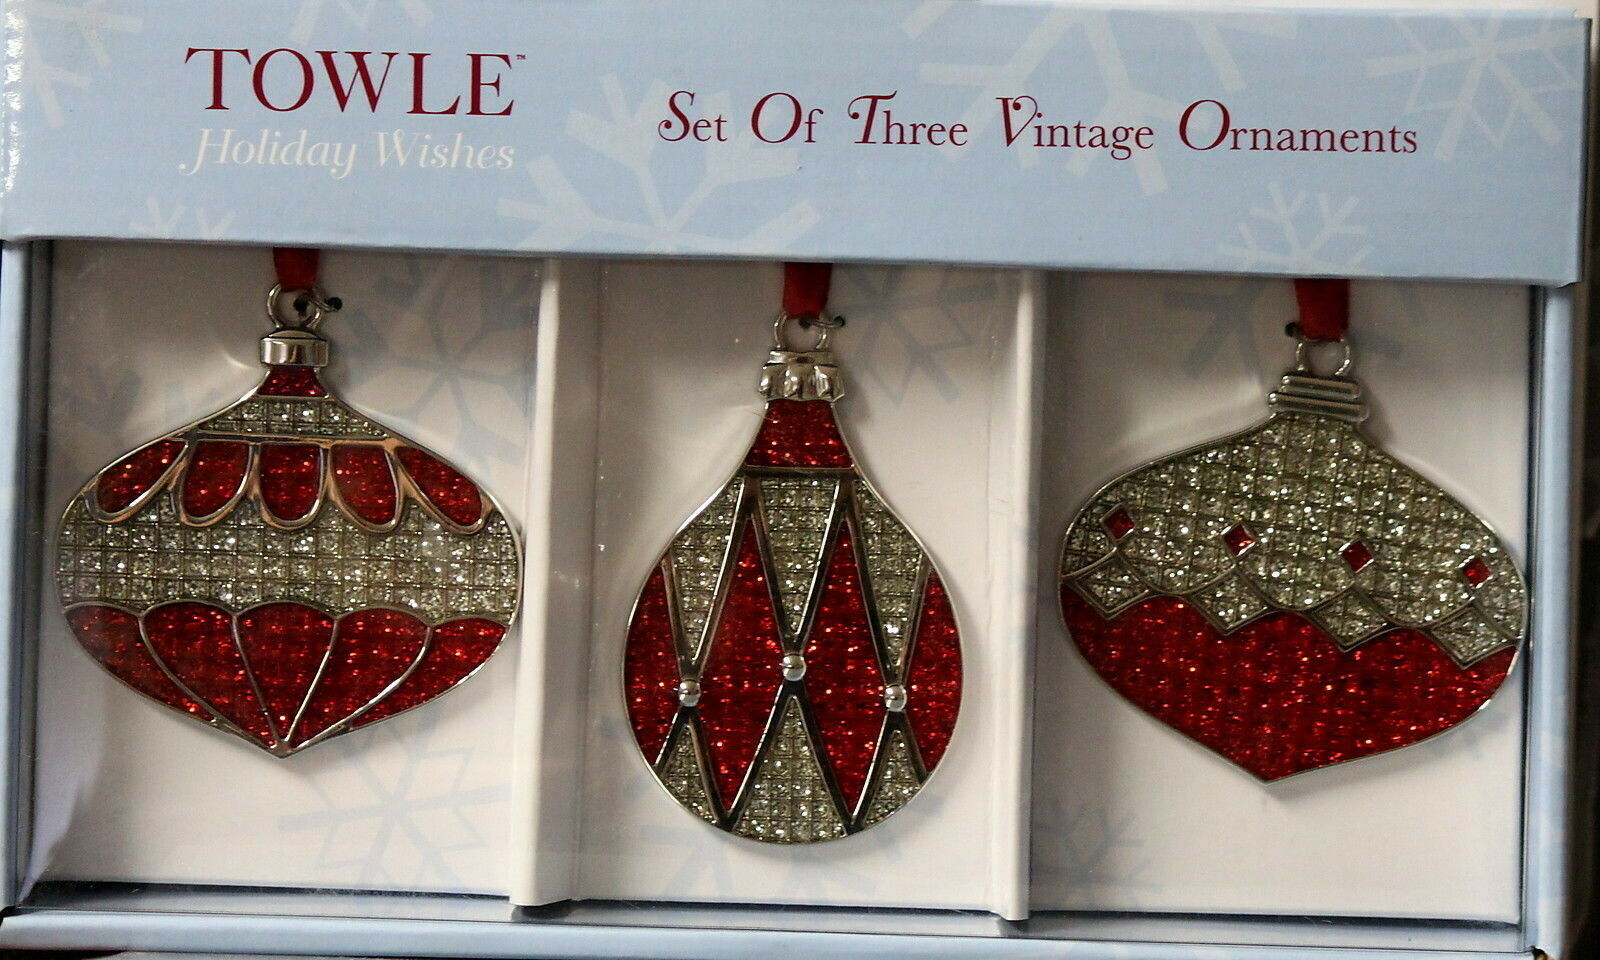 Towle Holiday Wishes Set of Three Vintage Ornaments